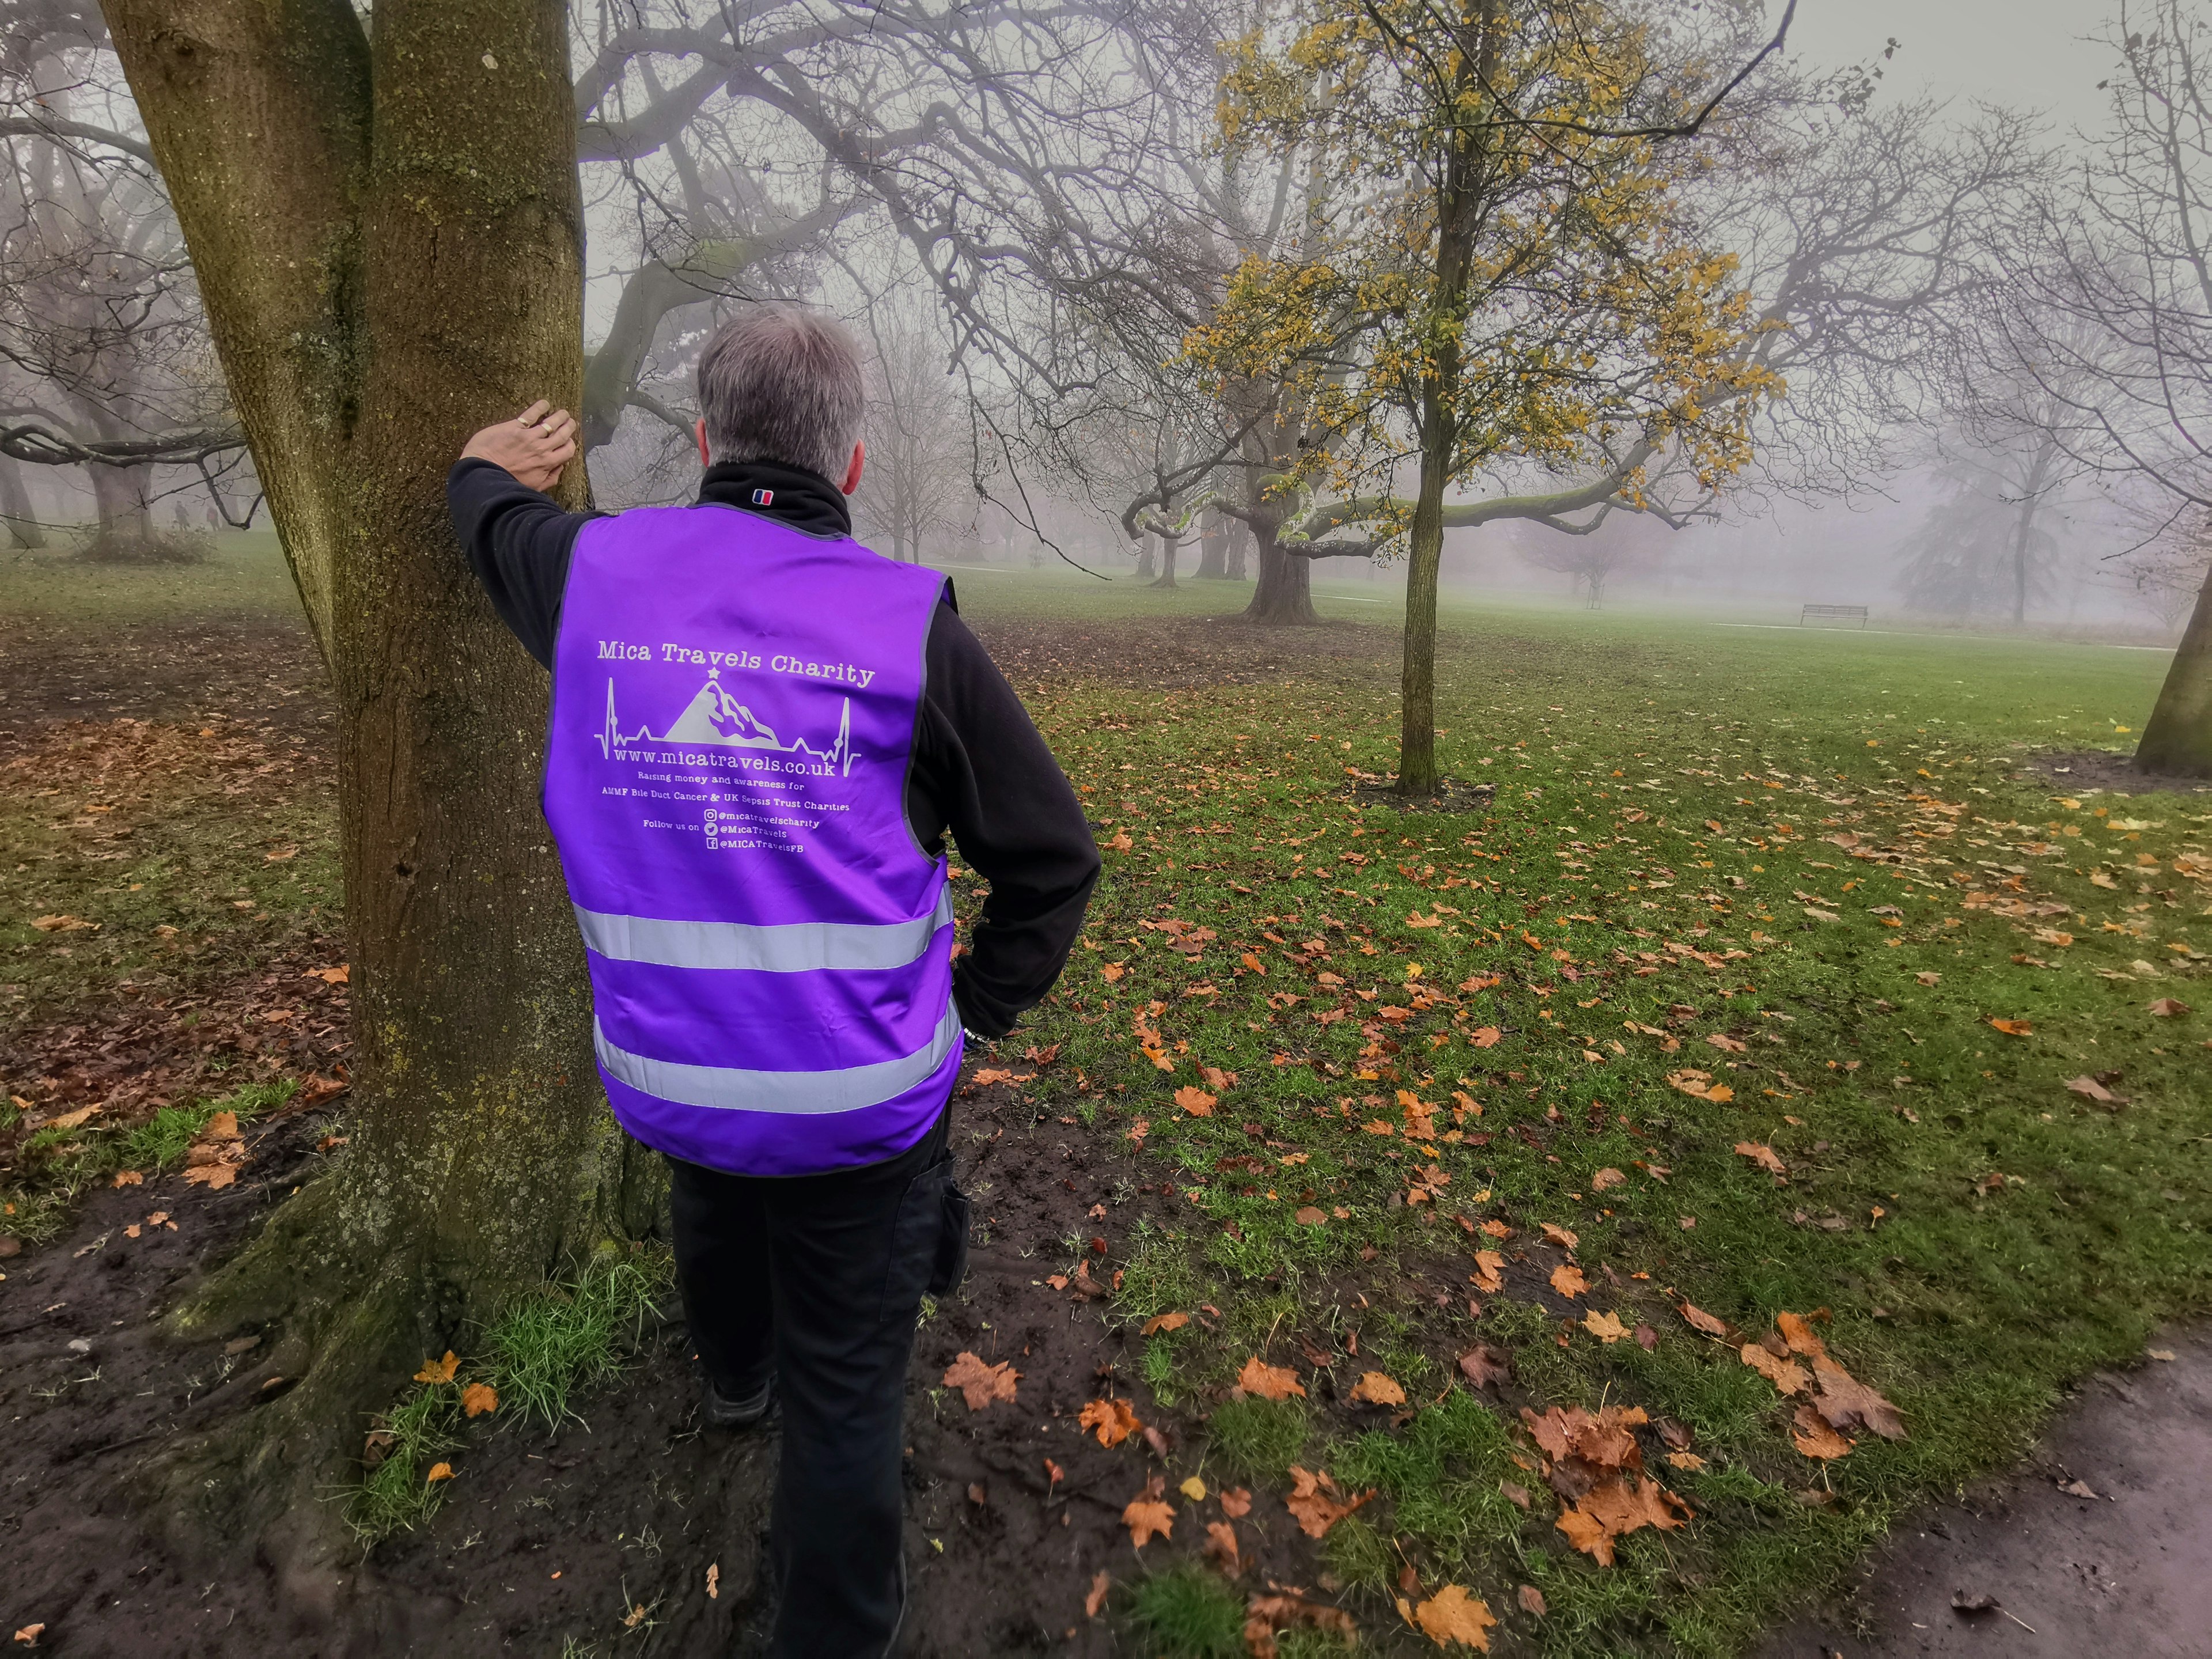 Mike leaning against a tree wearing a purple Mica Travels reflective vest